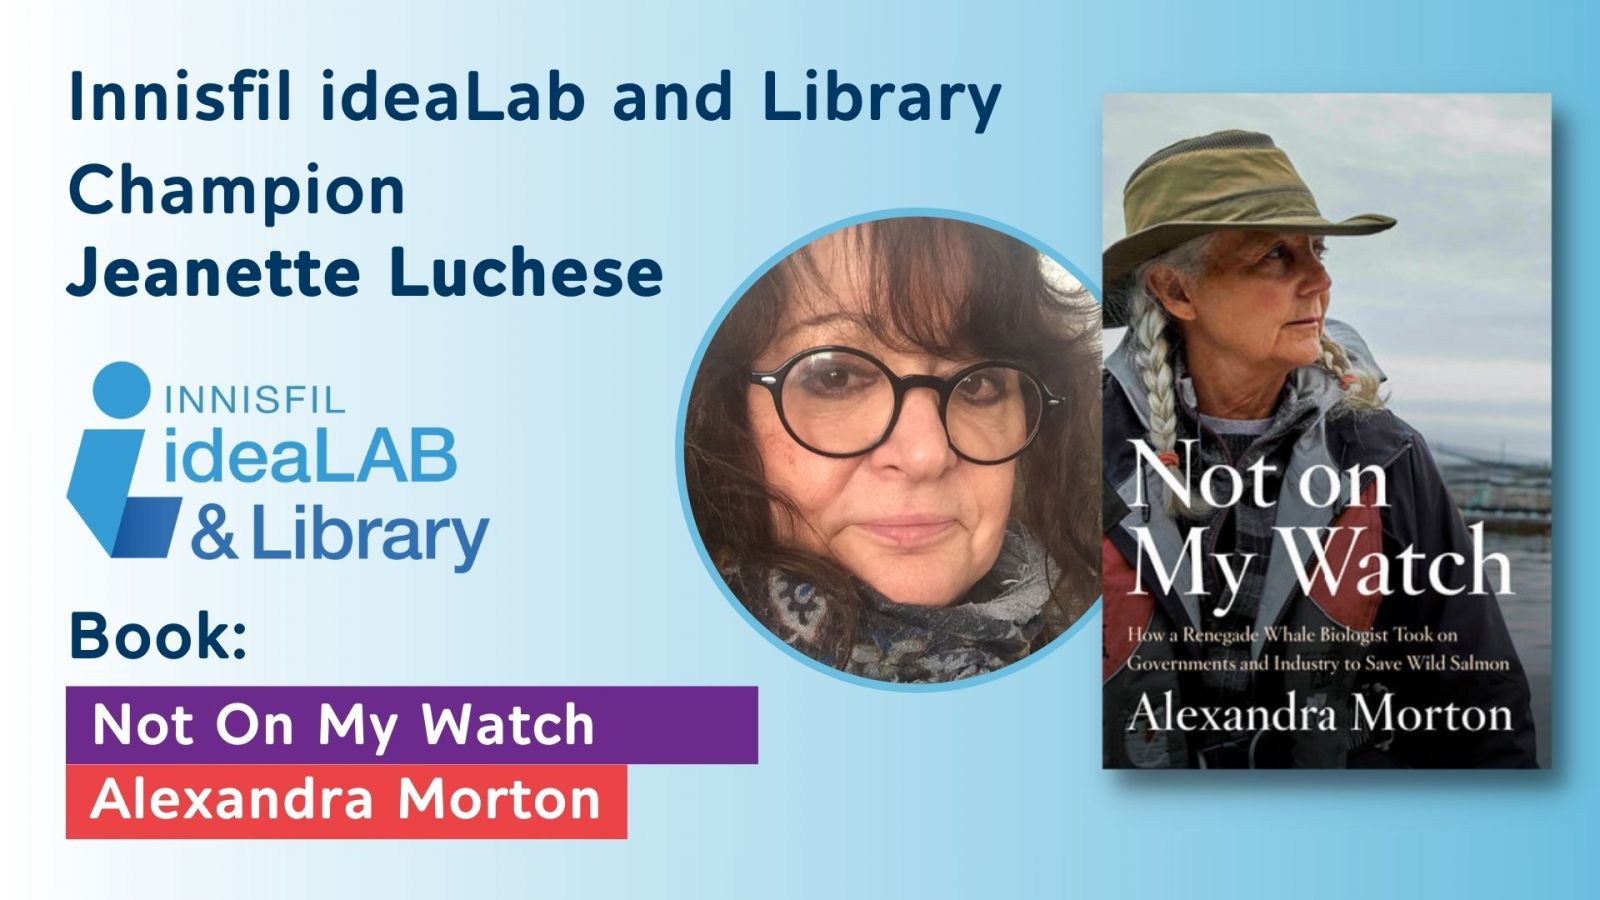 Innisfil ideaLab and  Library Champion: Jeanette Luchese _Innisfil ideaLAB and Library Book: Not on my Watch by Alexandra Morton 